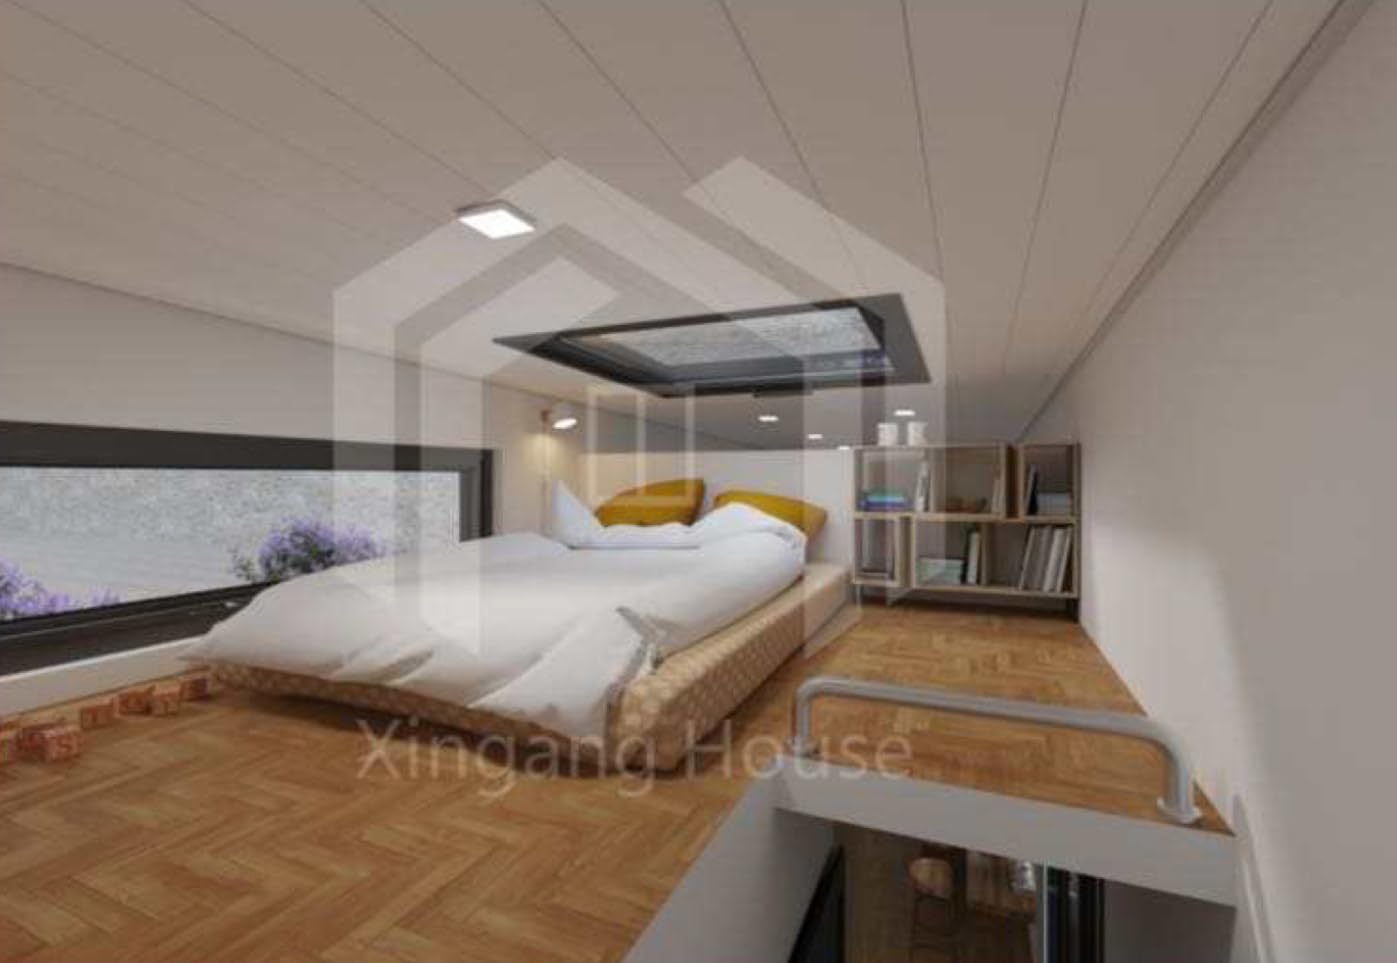 Luxury Car Trailer or Wooden-Style House: Bedroom and Bathroom - Ideal for Travel and Leisure